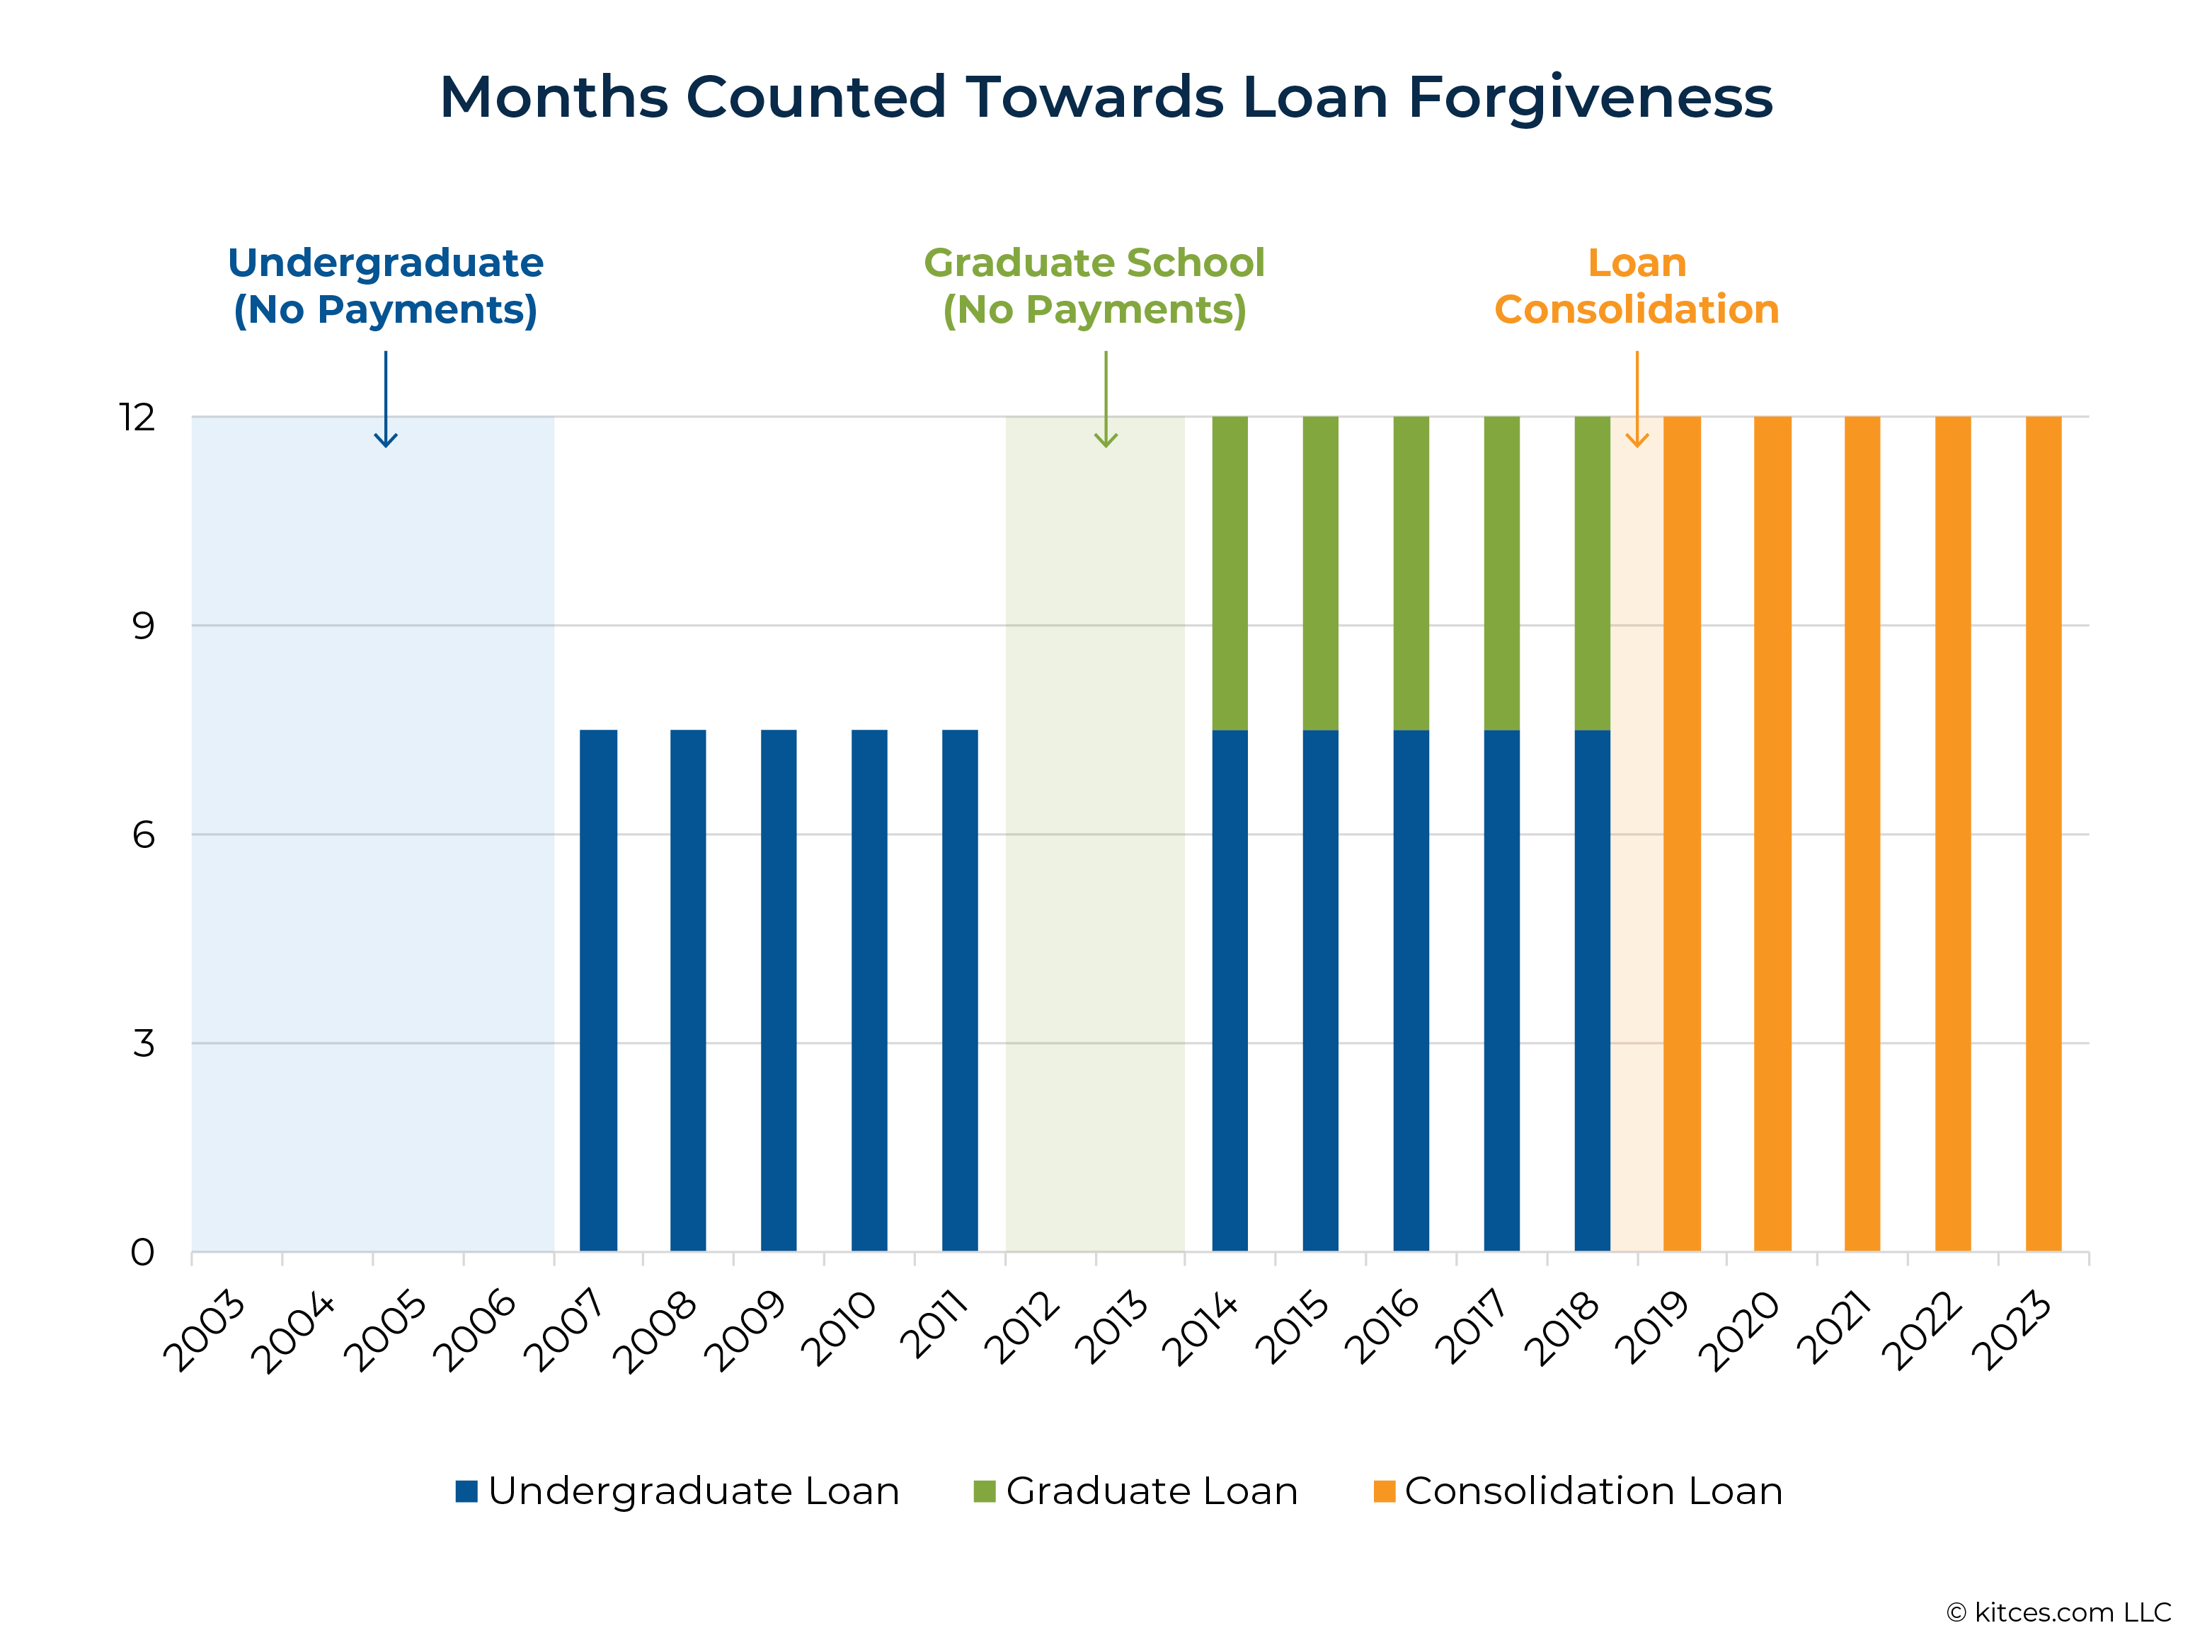 Months Counted Towards Loan Forgiveness